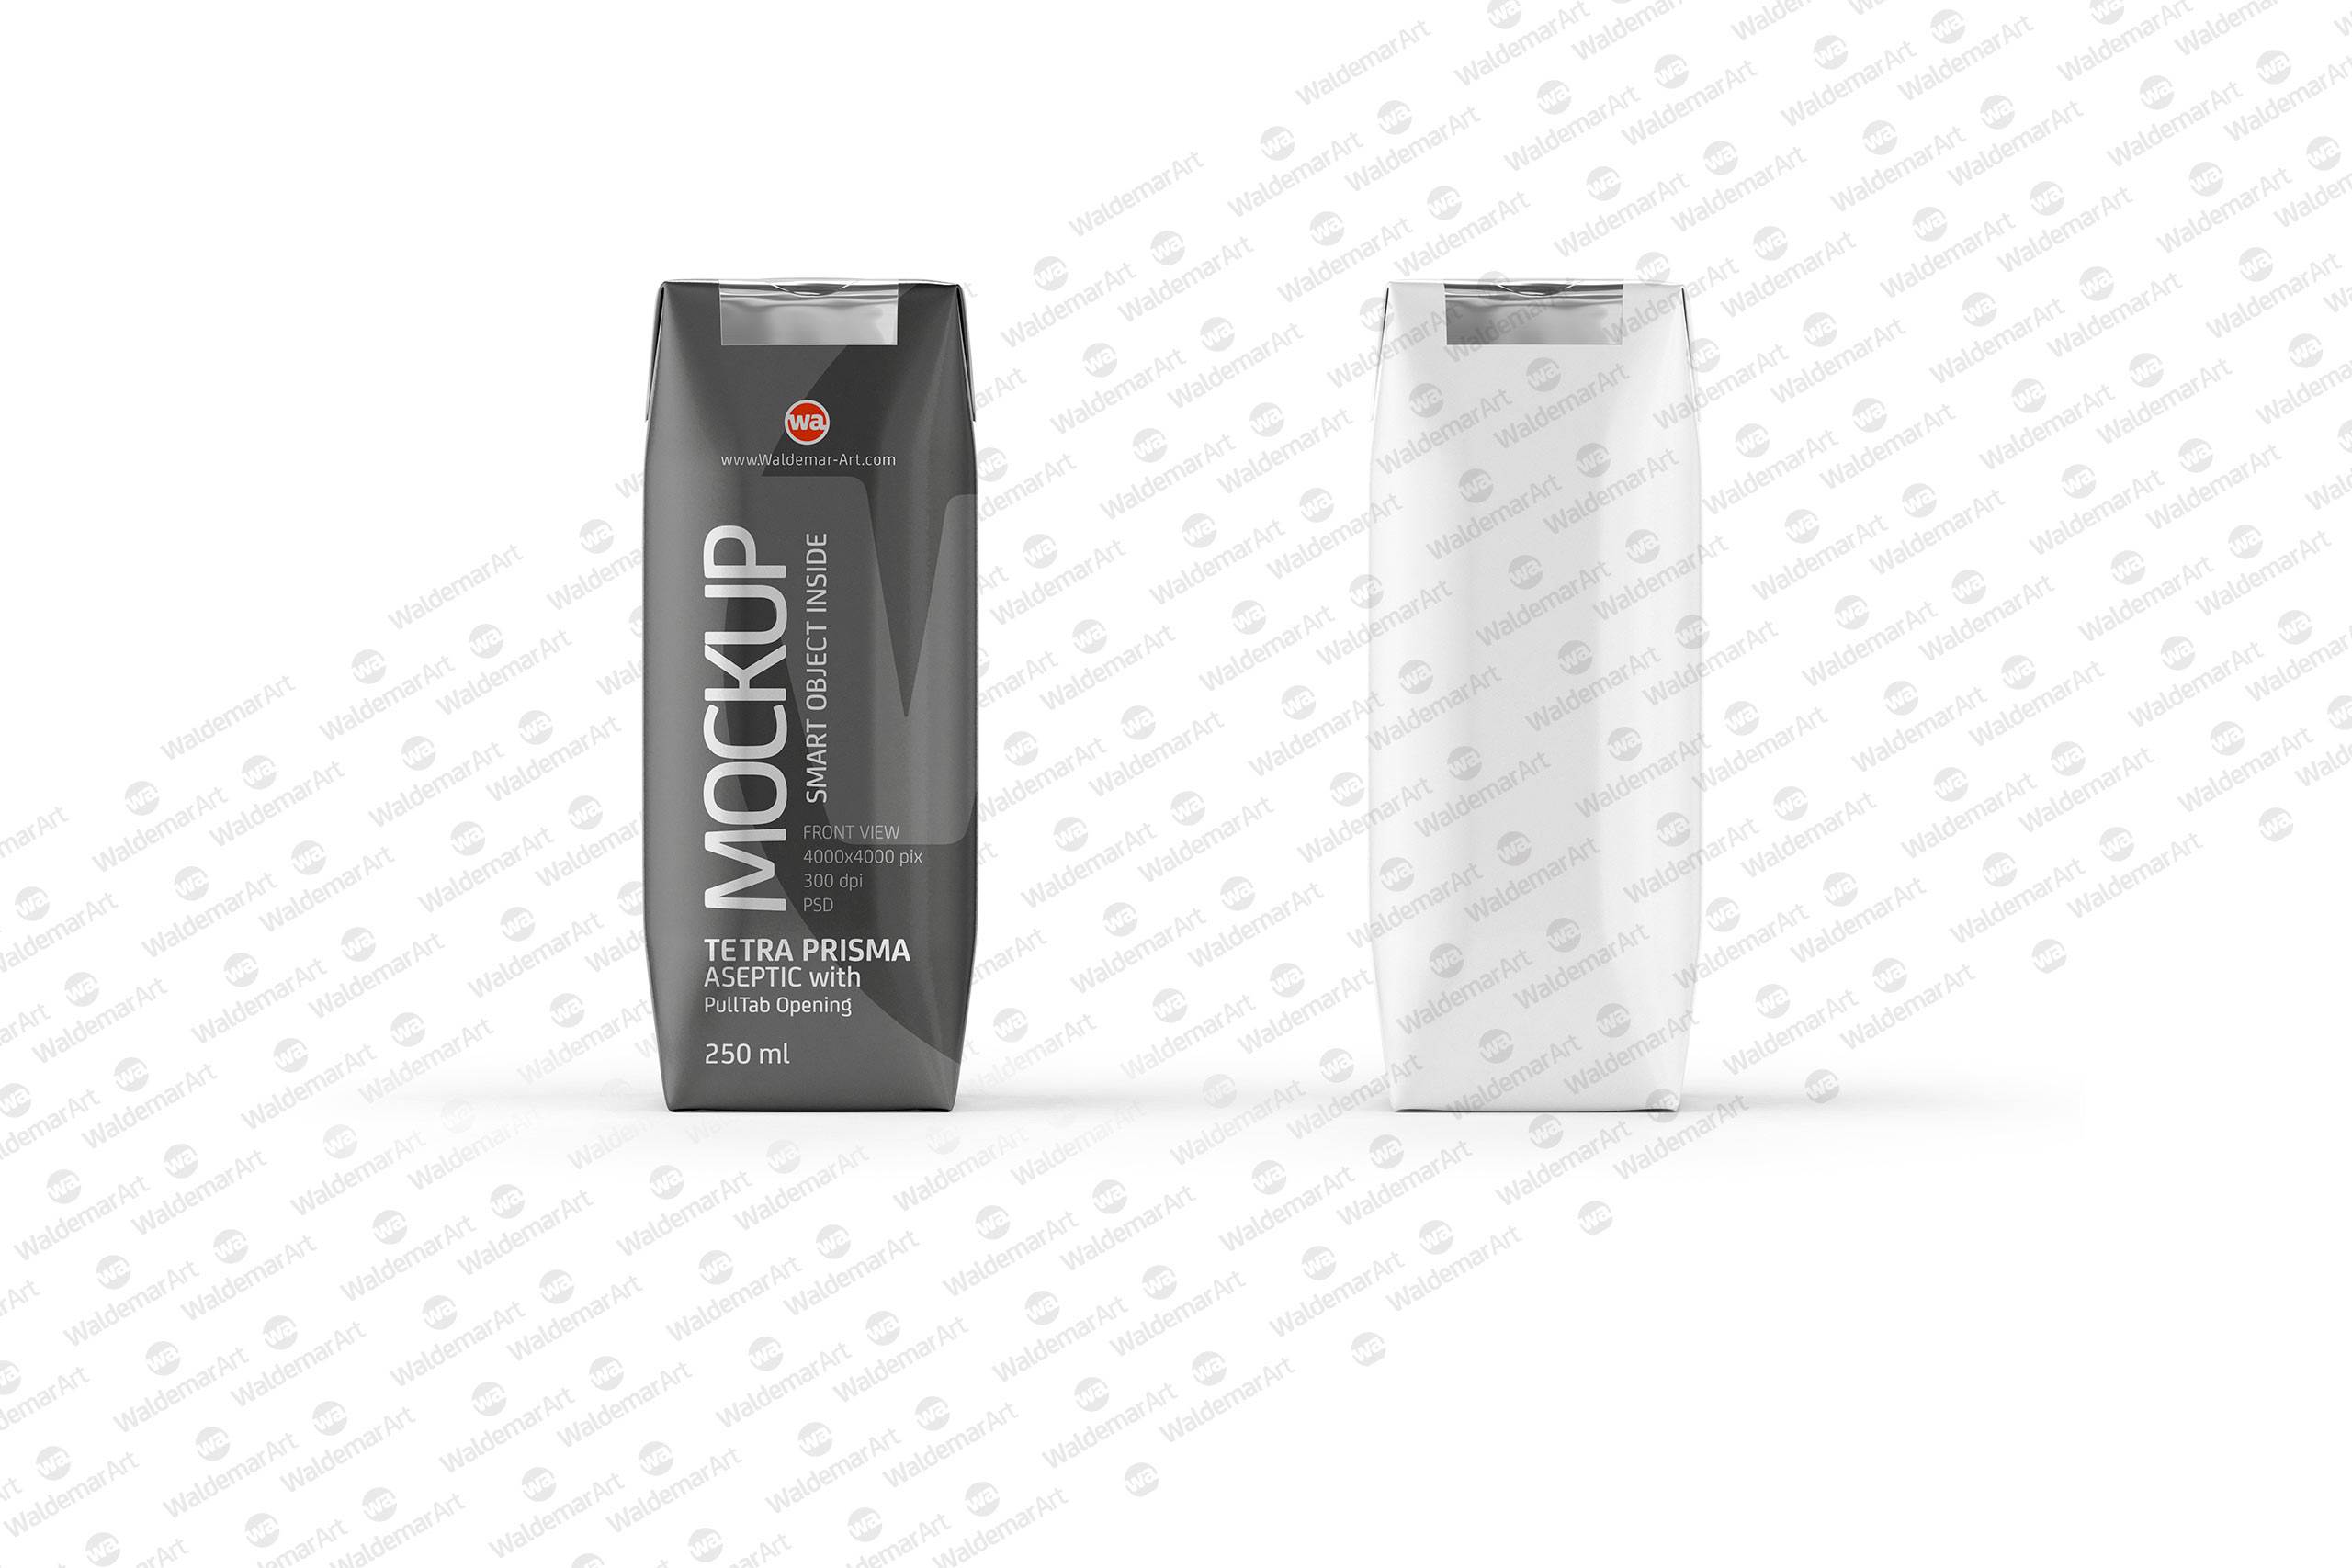 Download Packaging Mockup of Tetra Pack Prisma 250ml with PullTab - Front View / WA Design Studio